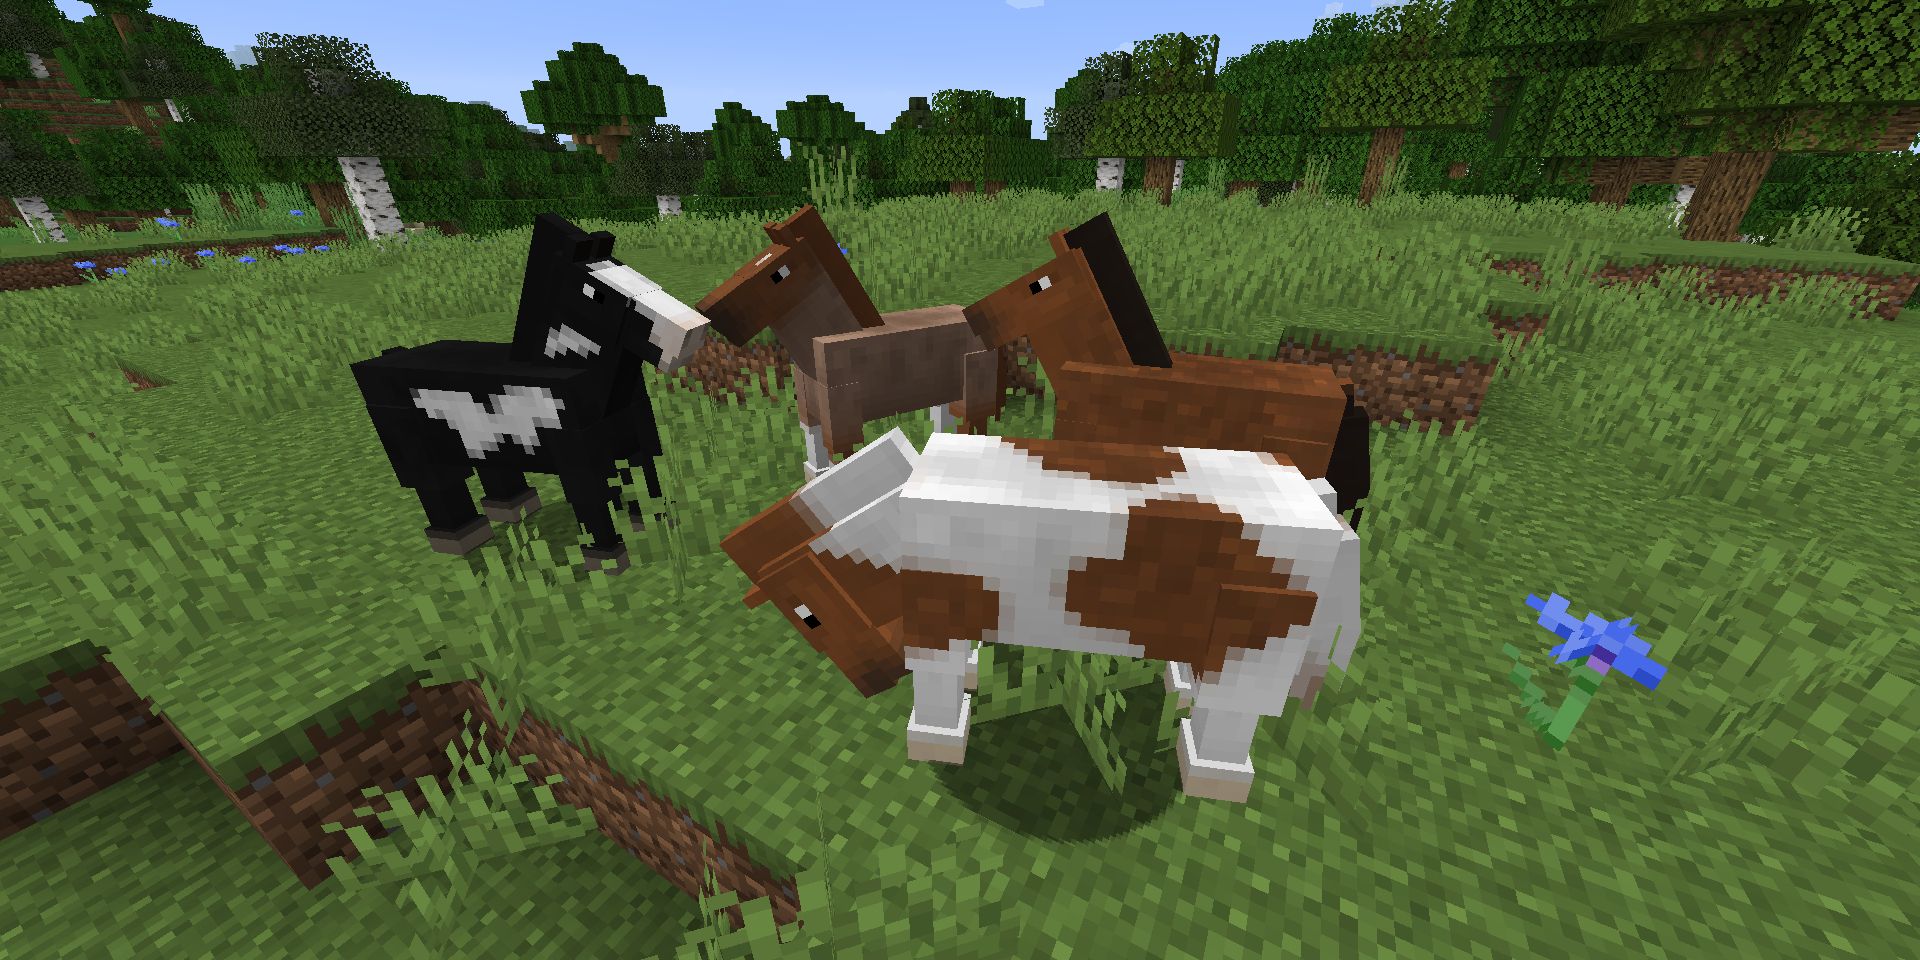 What is the title of this picture ? How To Breed Horses In Minecraft